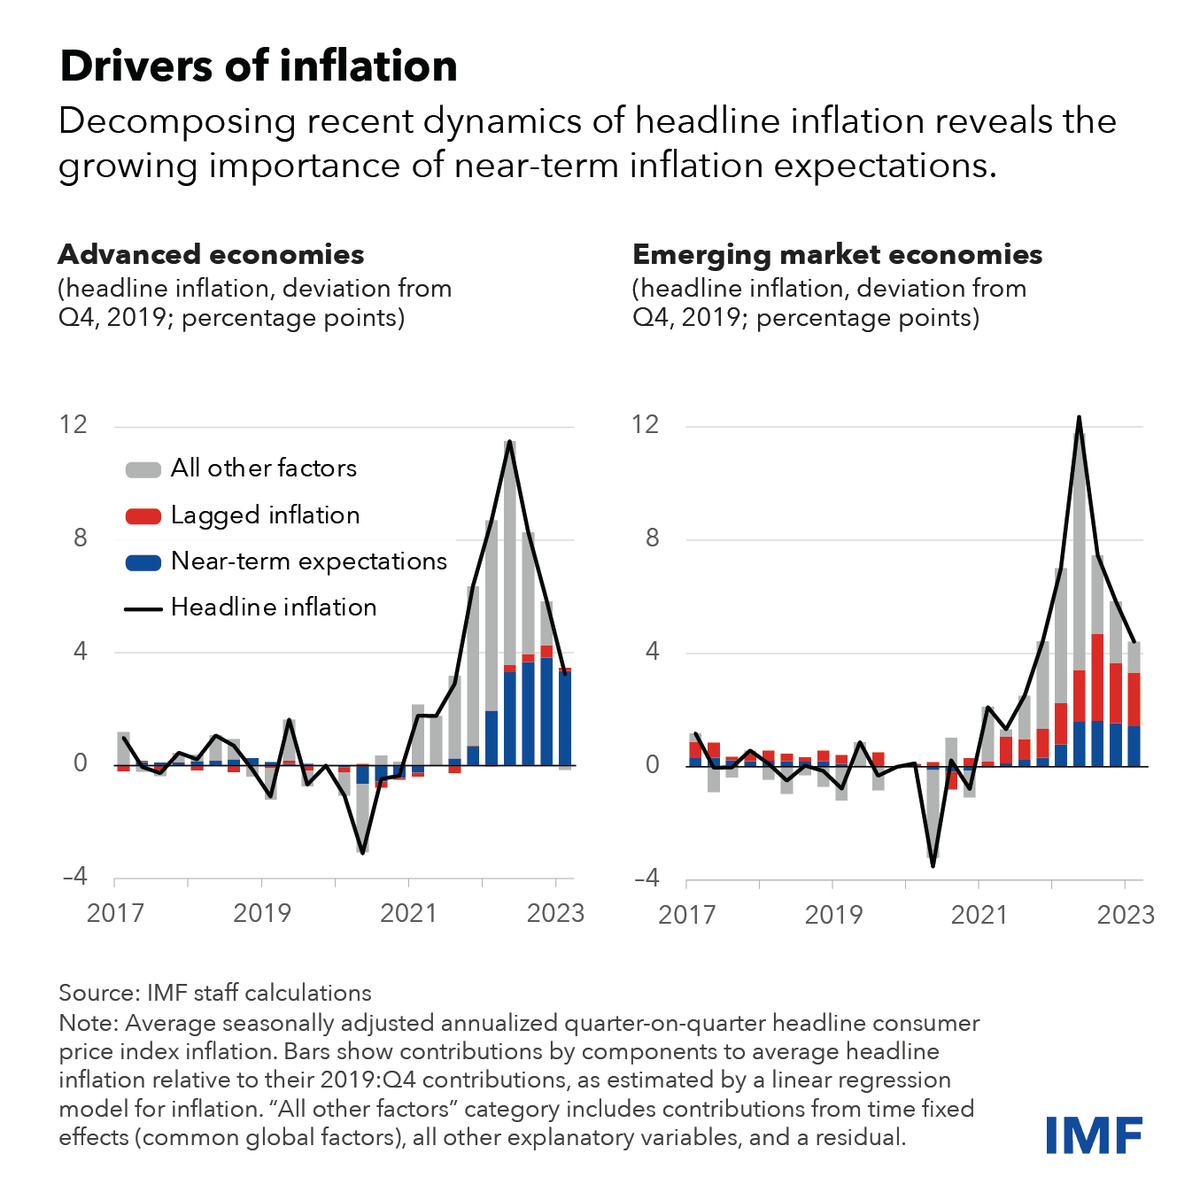 People’s expectations about future inflation play a key role in driving price increases because they influence consumption and investment decisions, which in turn affect prices and wages. imf.org/en/Blogs/Artic…